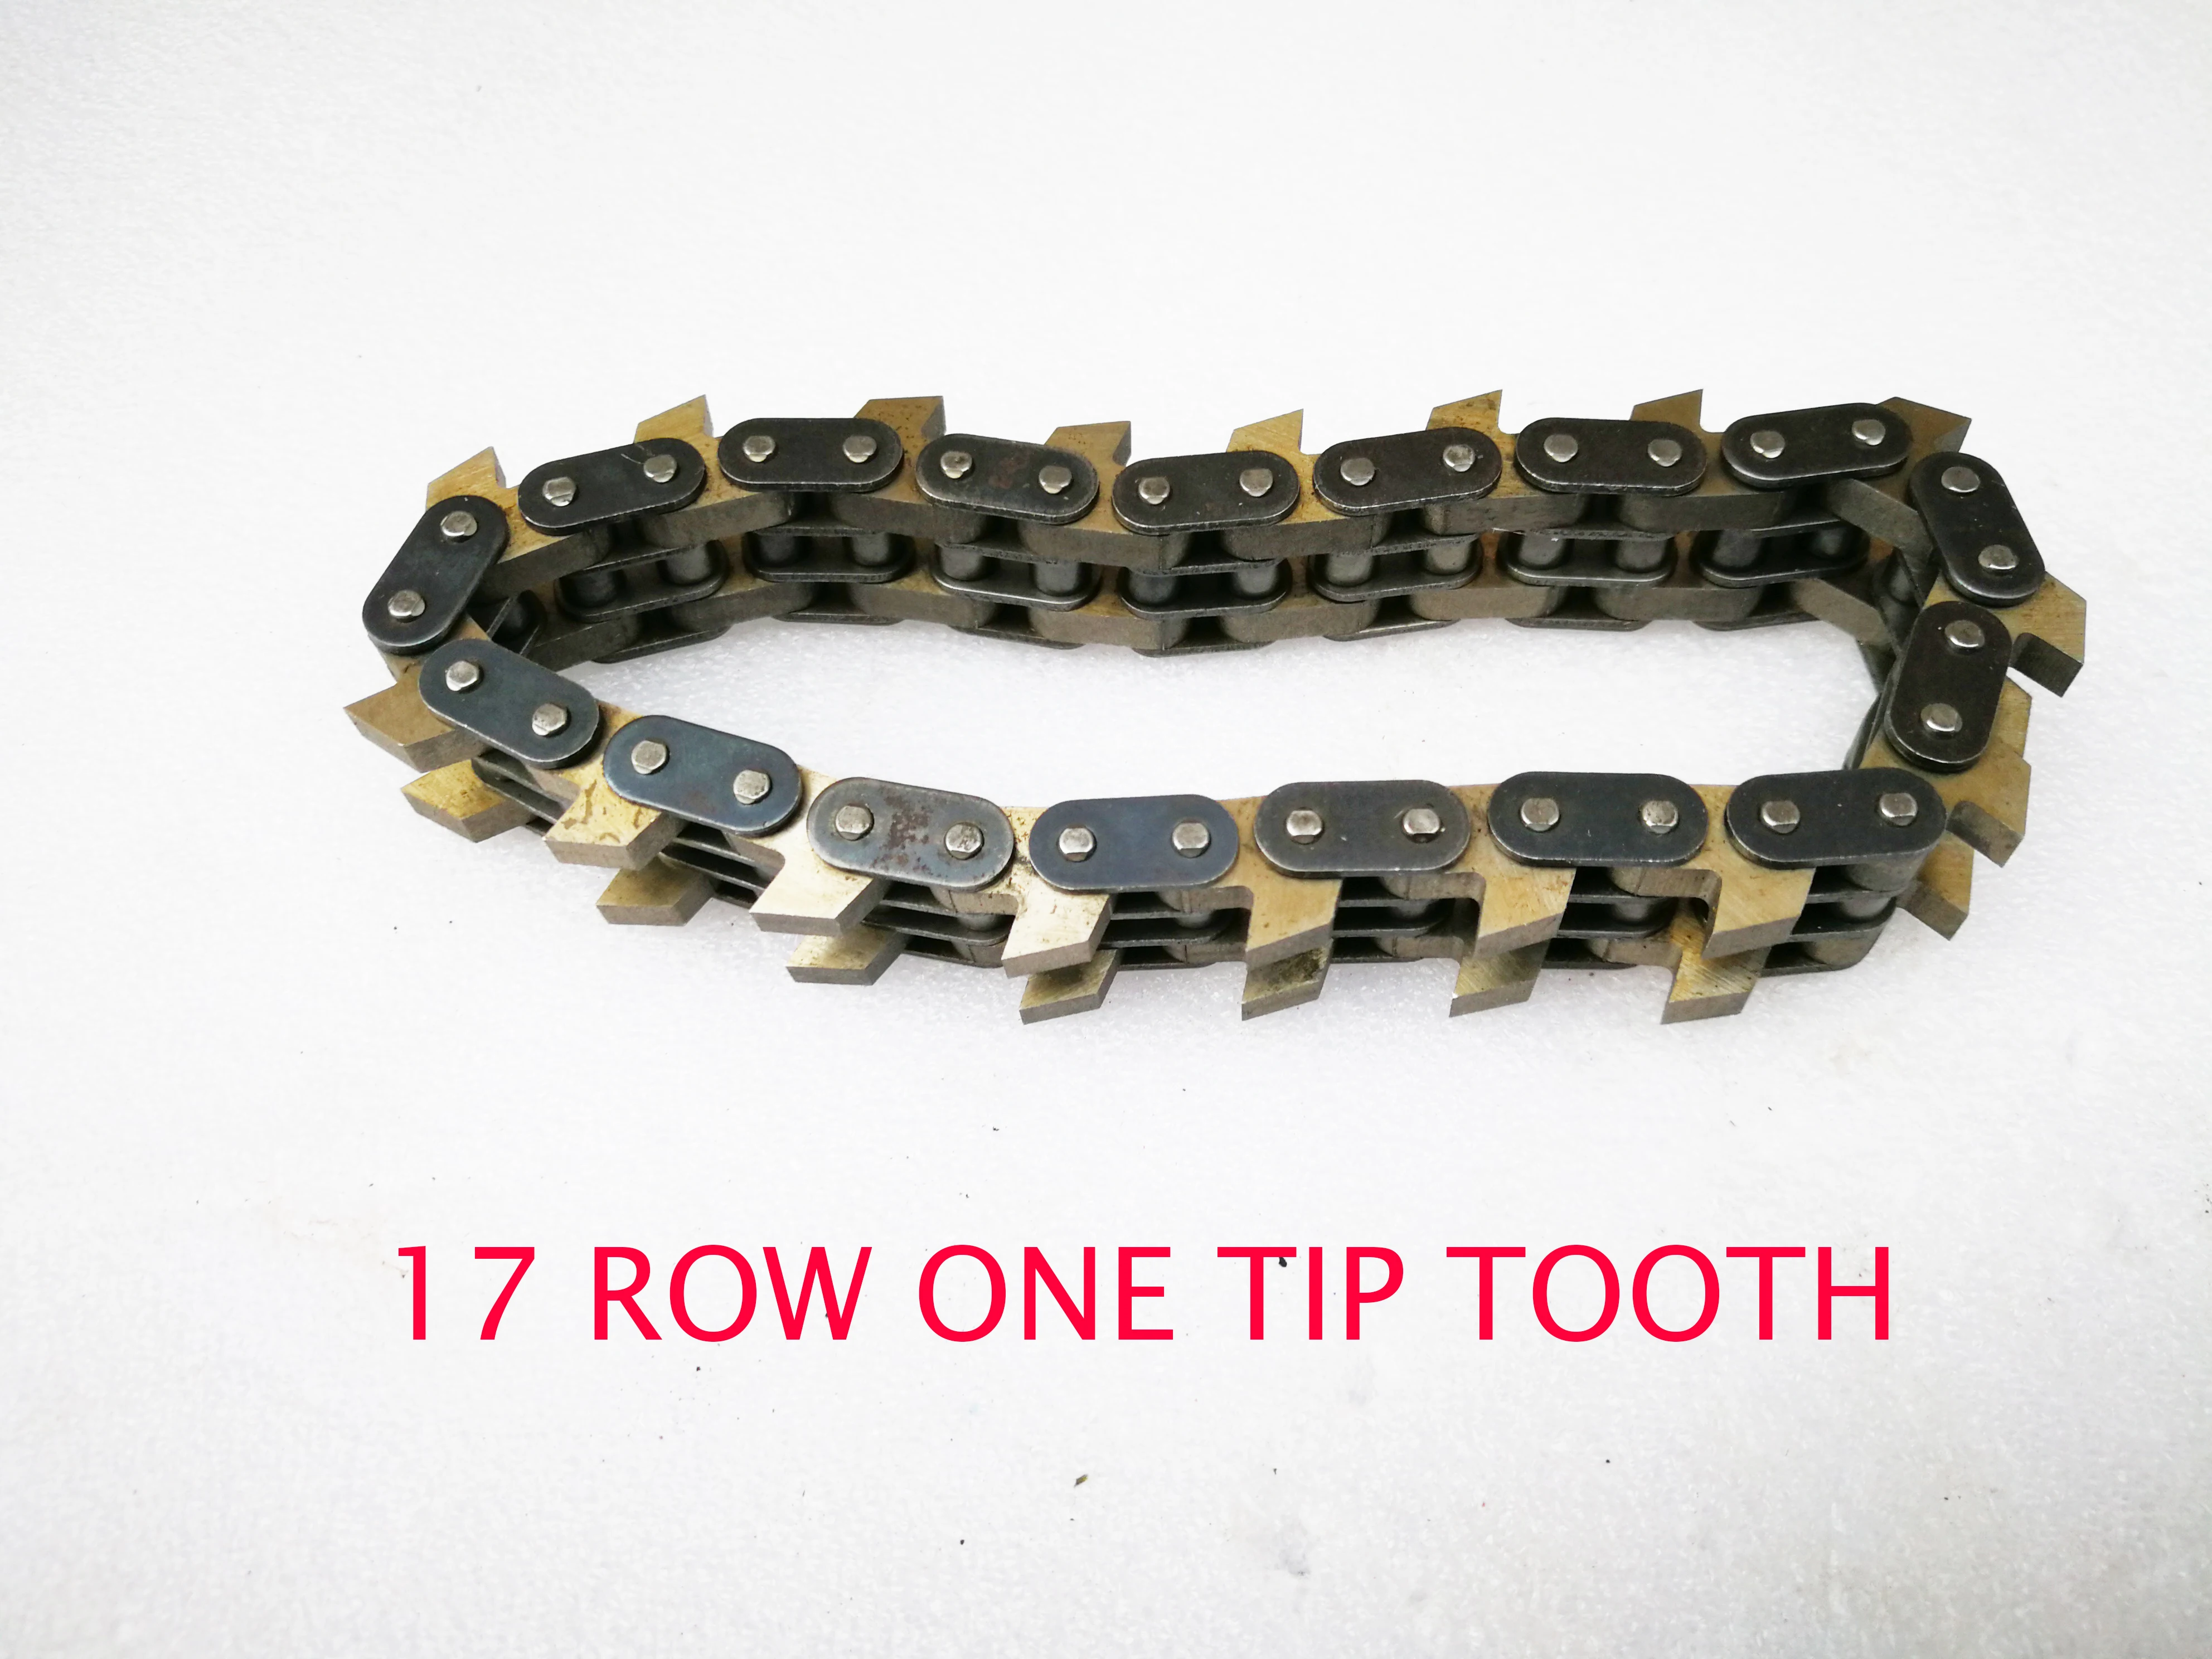 Enlarge 17 Row One Tip Middle Tooth Joint Cutter Saw Chain For Pneumatic Waste Stripper Carton Paper Stripping Machine Detachable Hinge